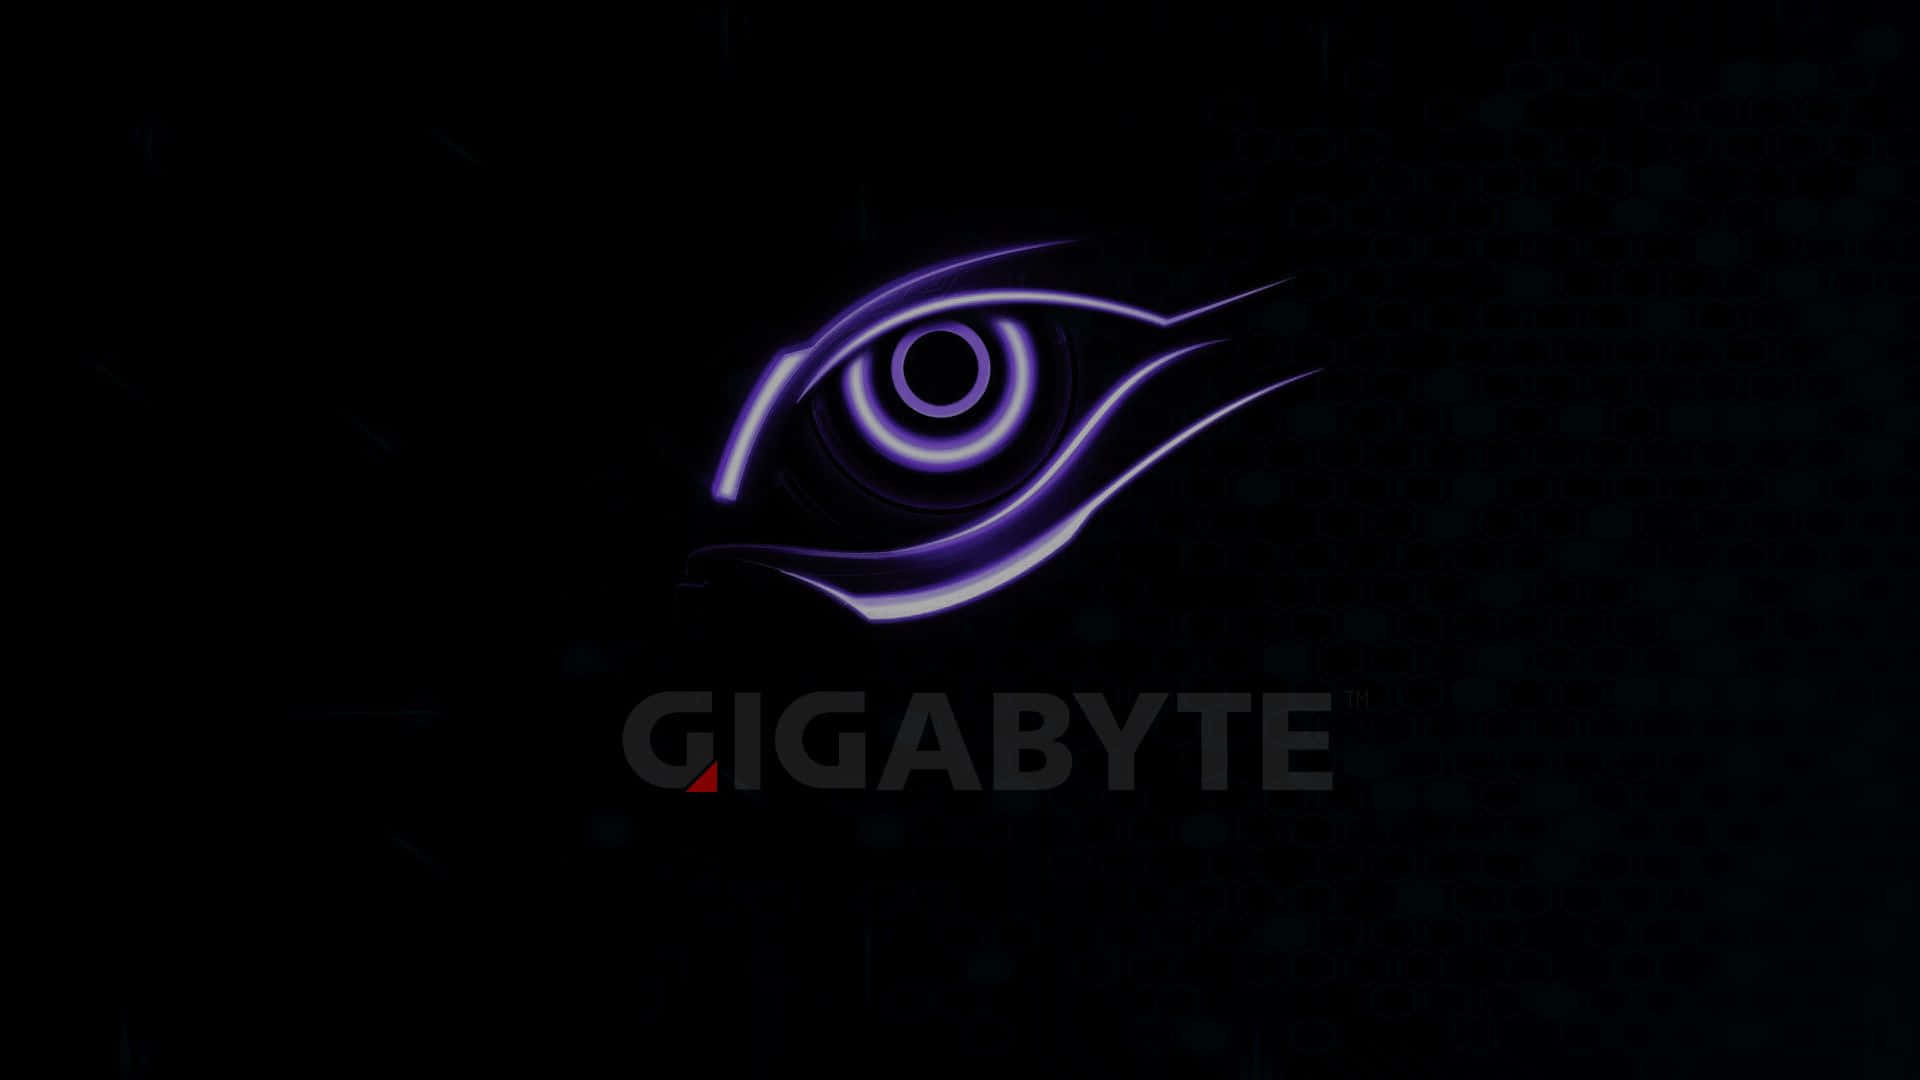 A Logo With The Word Gigabyte On It